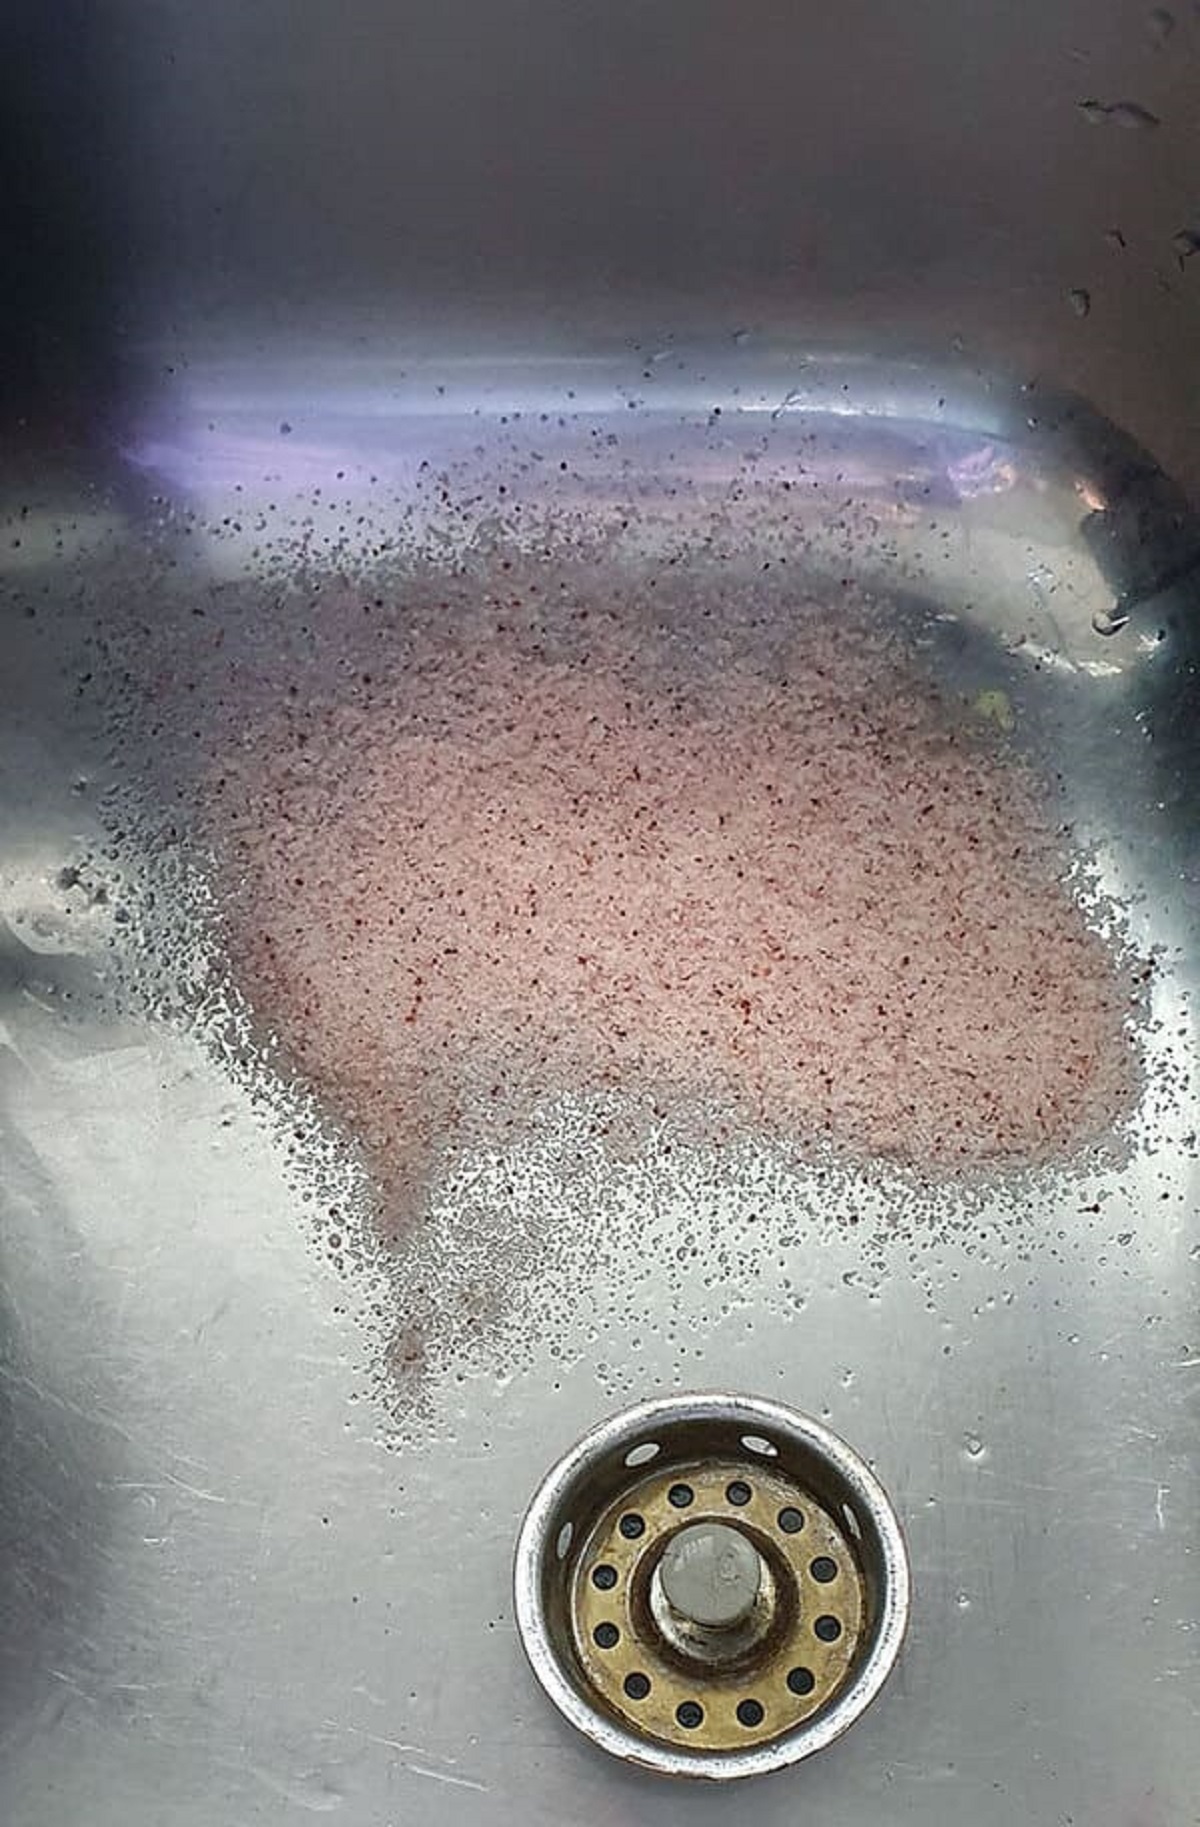 “I Asked My Mom To Put The Remaining Salt In A Smaller Container, But She Dumped It All In The Sink. That’s Almost 200g Of Salt That Could’ve Easily Lasted Me Another 2 Months”